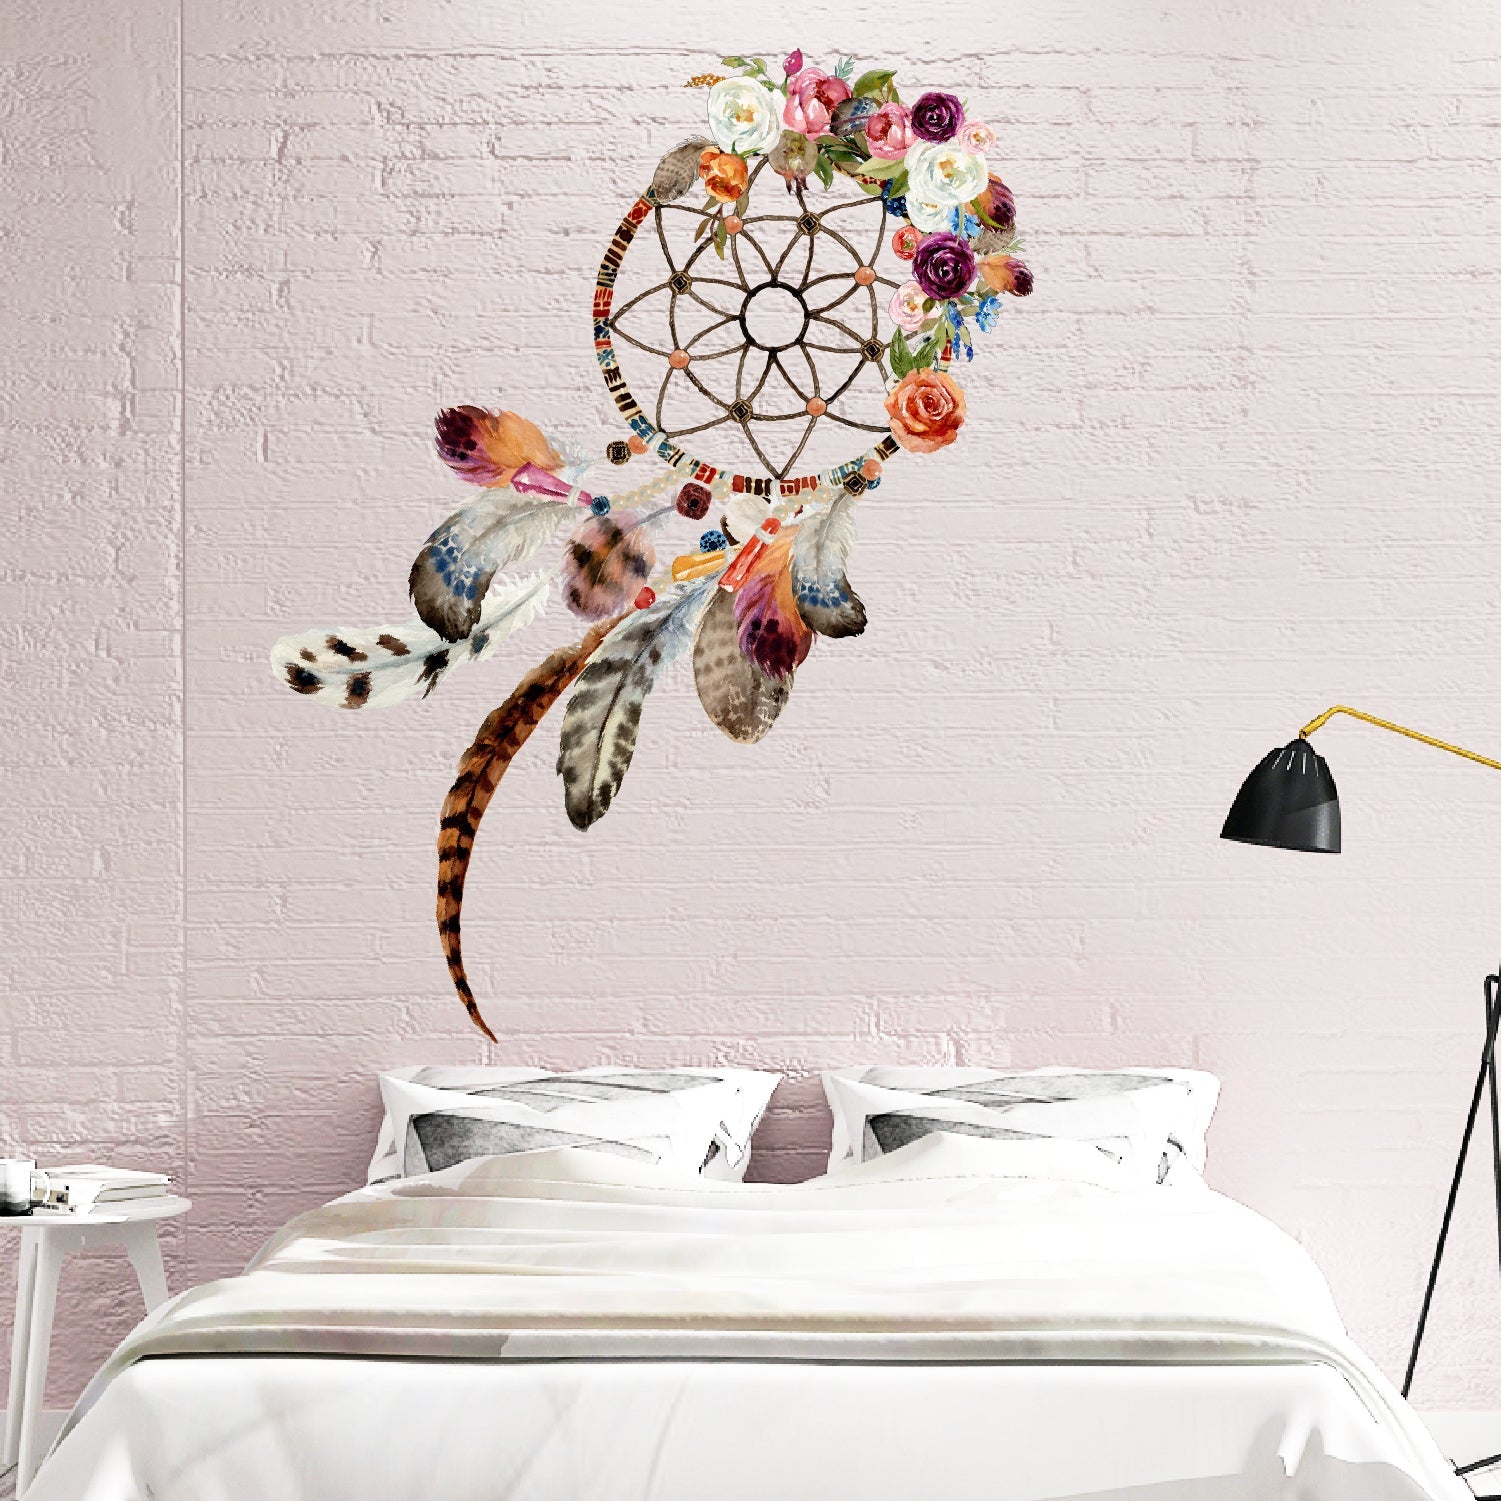 Boho Dreamcatcher and Flowers Fabric Wall Decals - Picture Perfect Decals